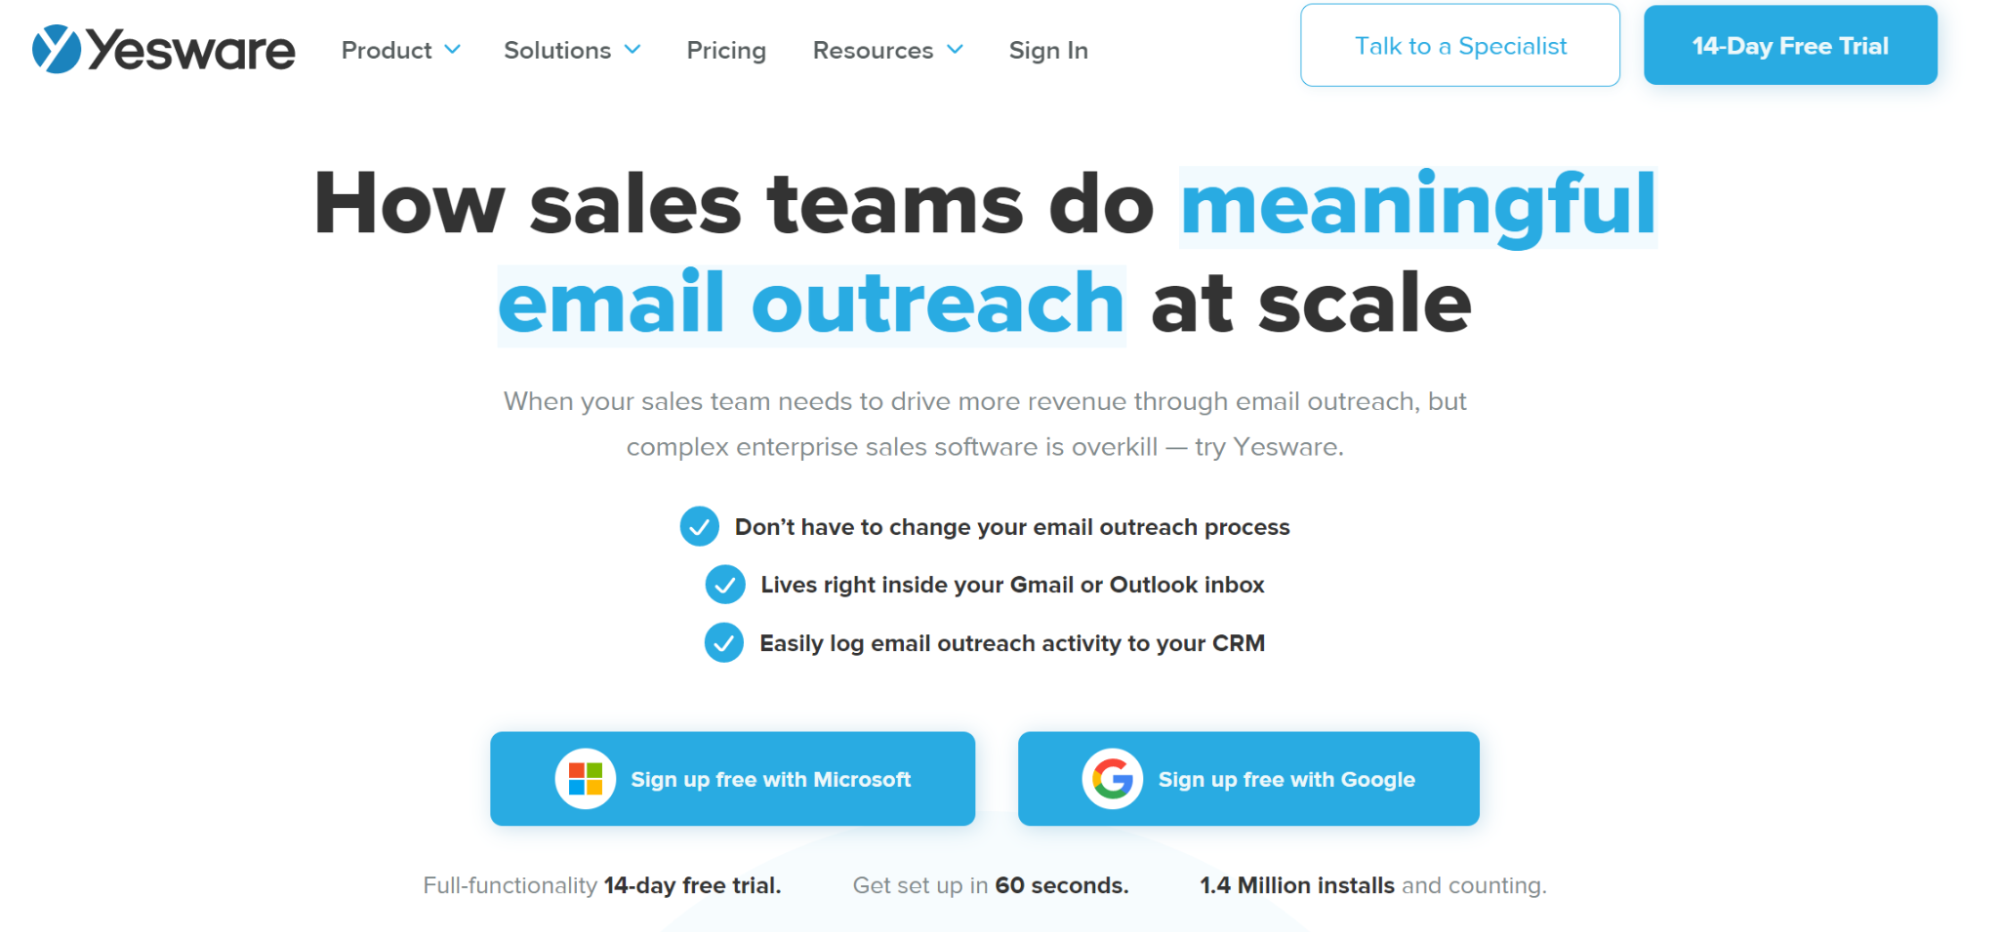  Yesware outreach tool